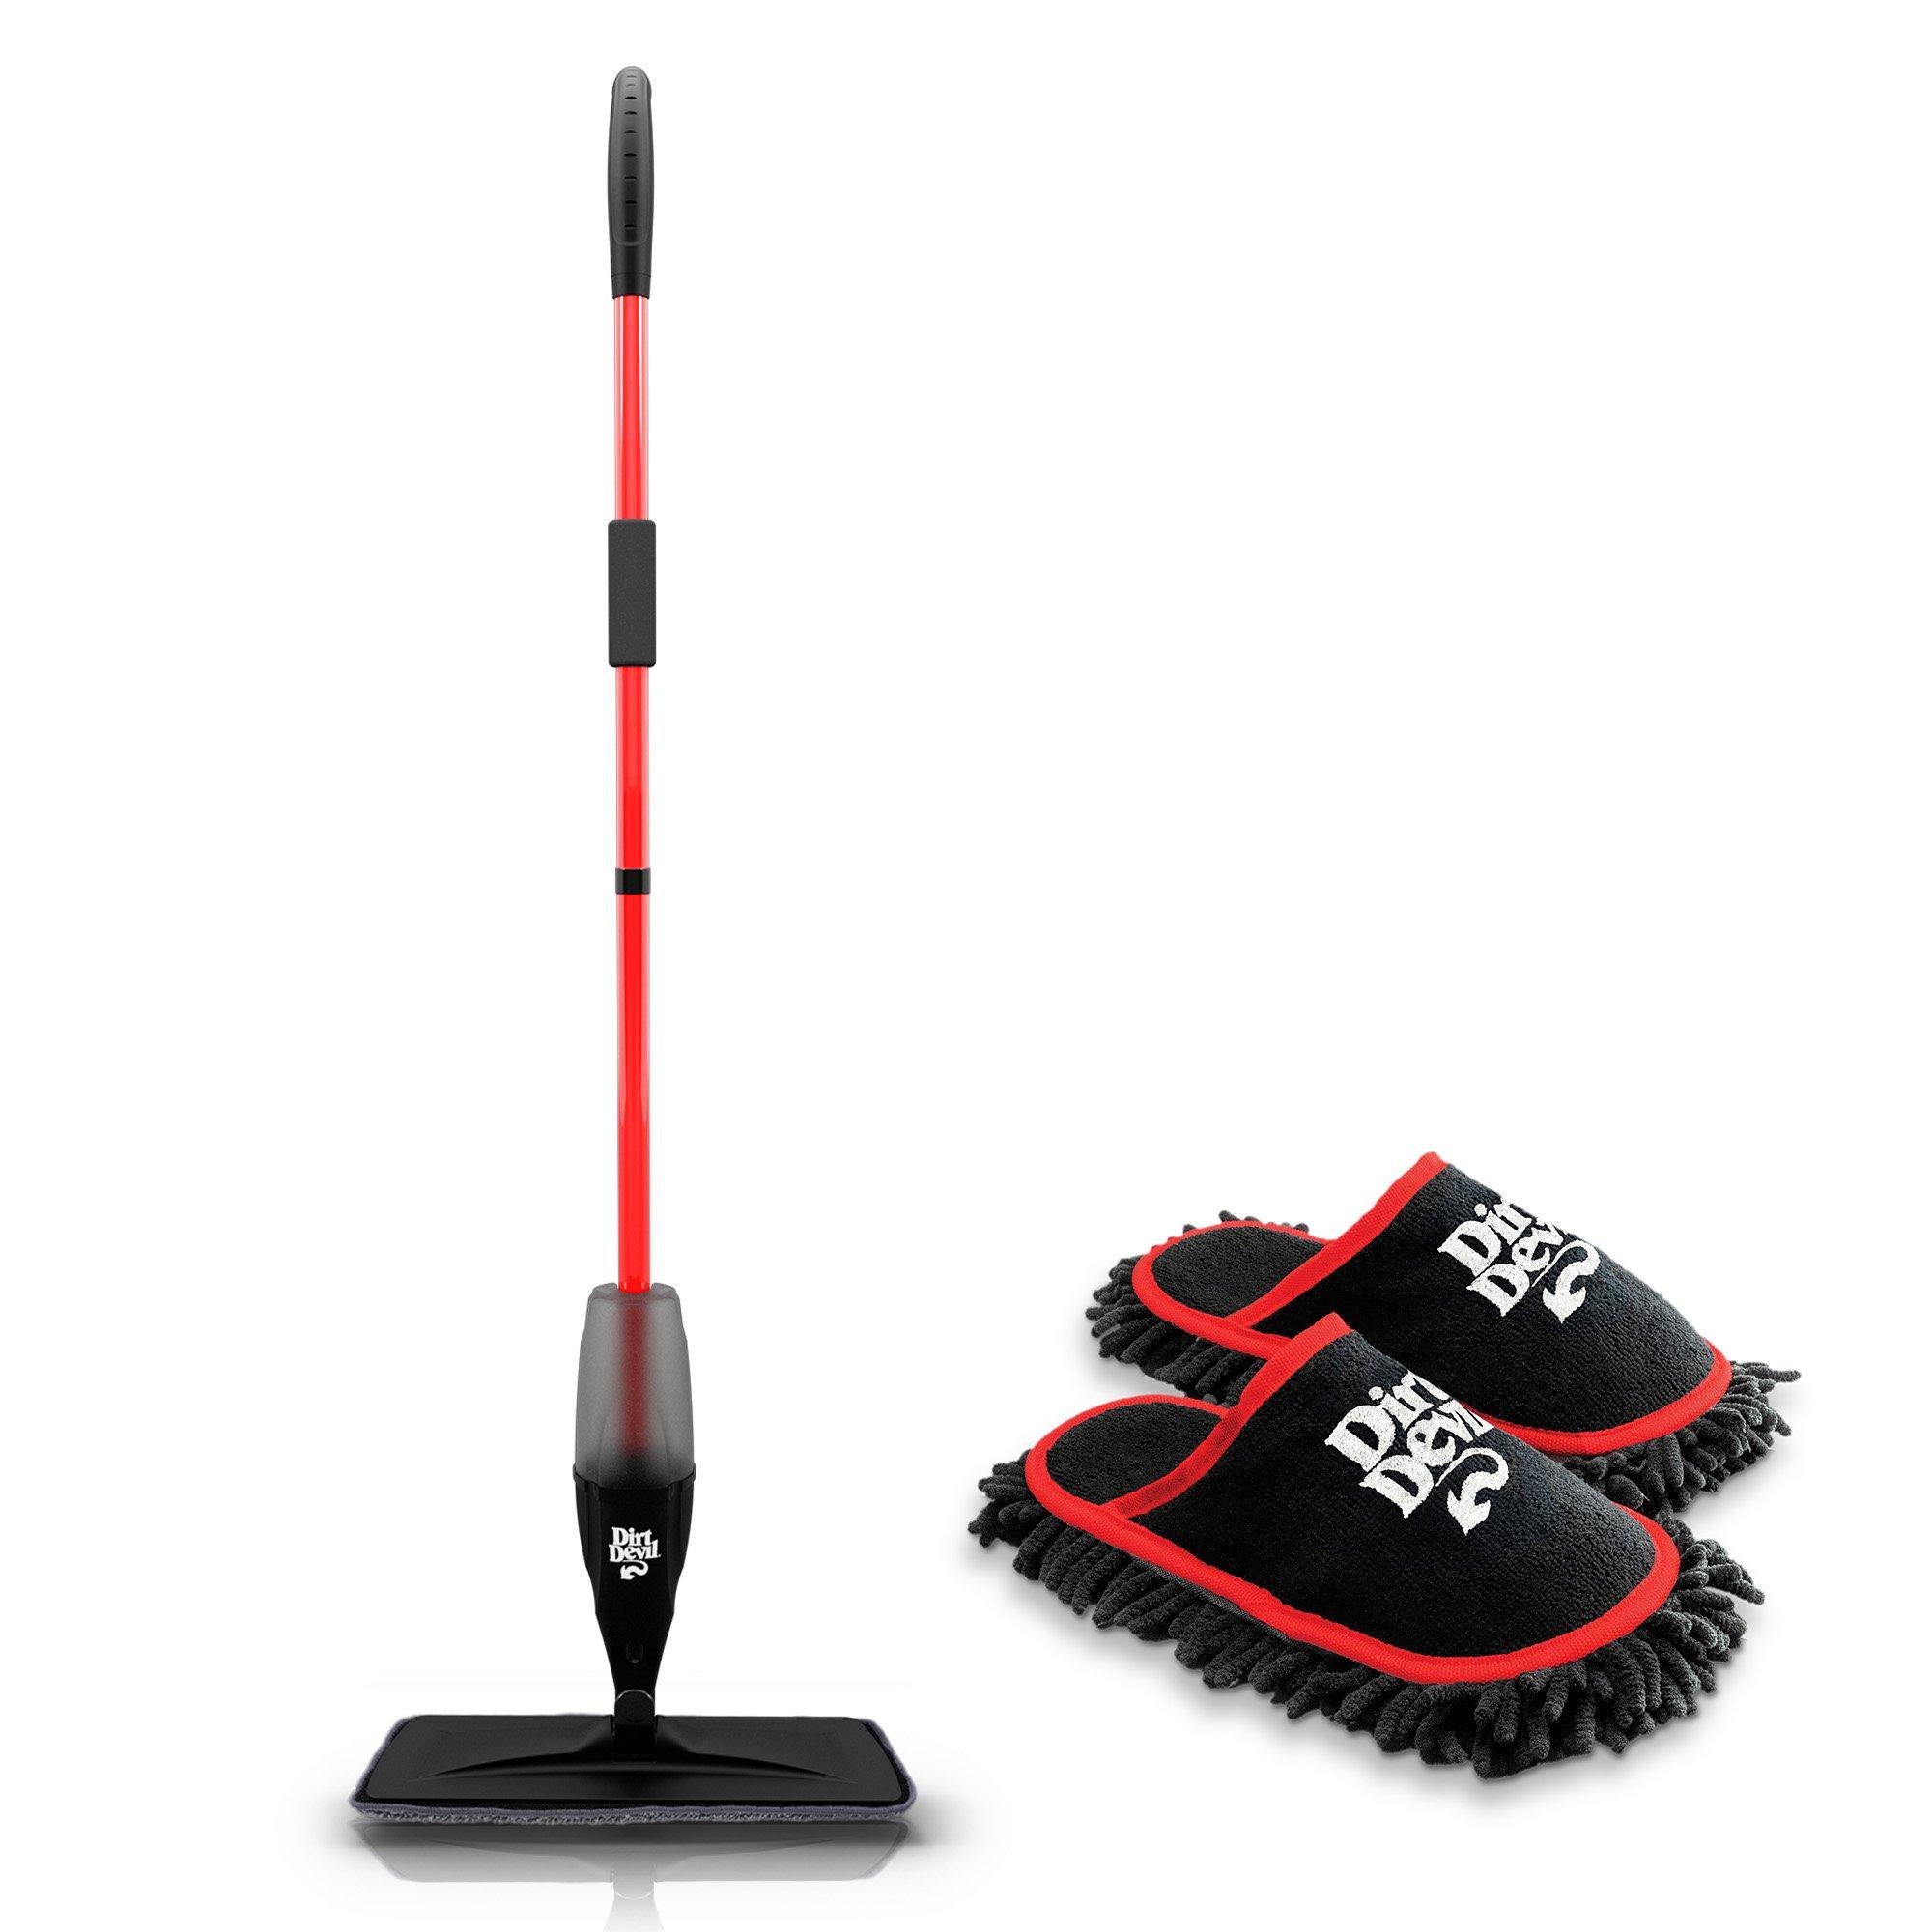 Dust Foot Mops Slipper House Bathroom Floor Cleaning Foot Mop Cleaner  Slippers Lazy Shoes Covers Microfiber WLL21 From Crazyprice, $0.66 |  DHgate.Com